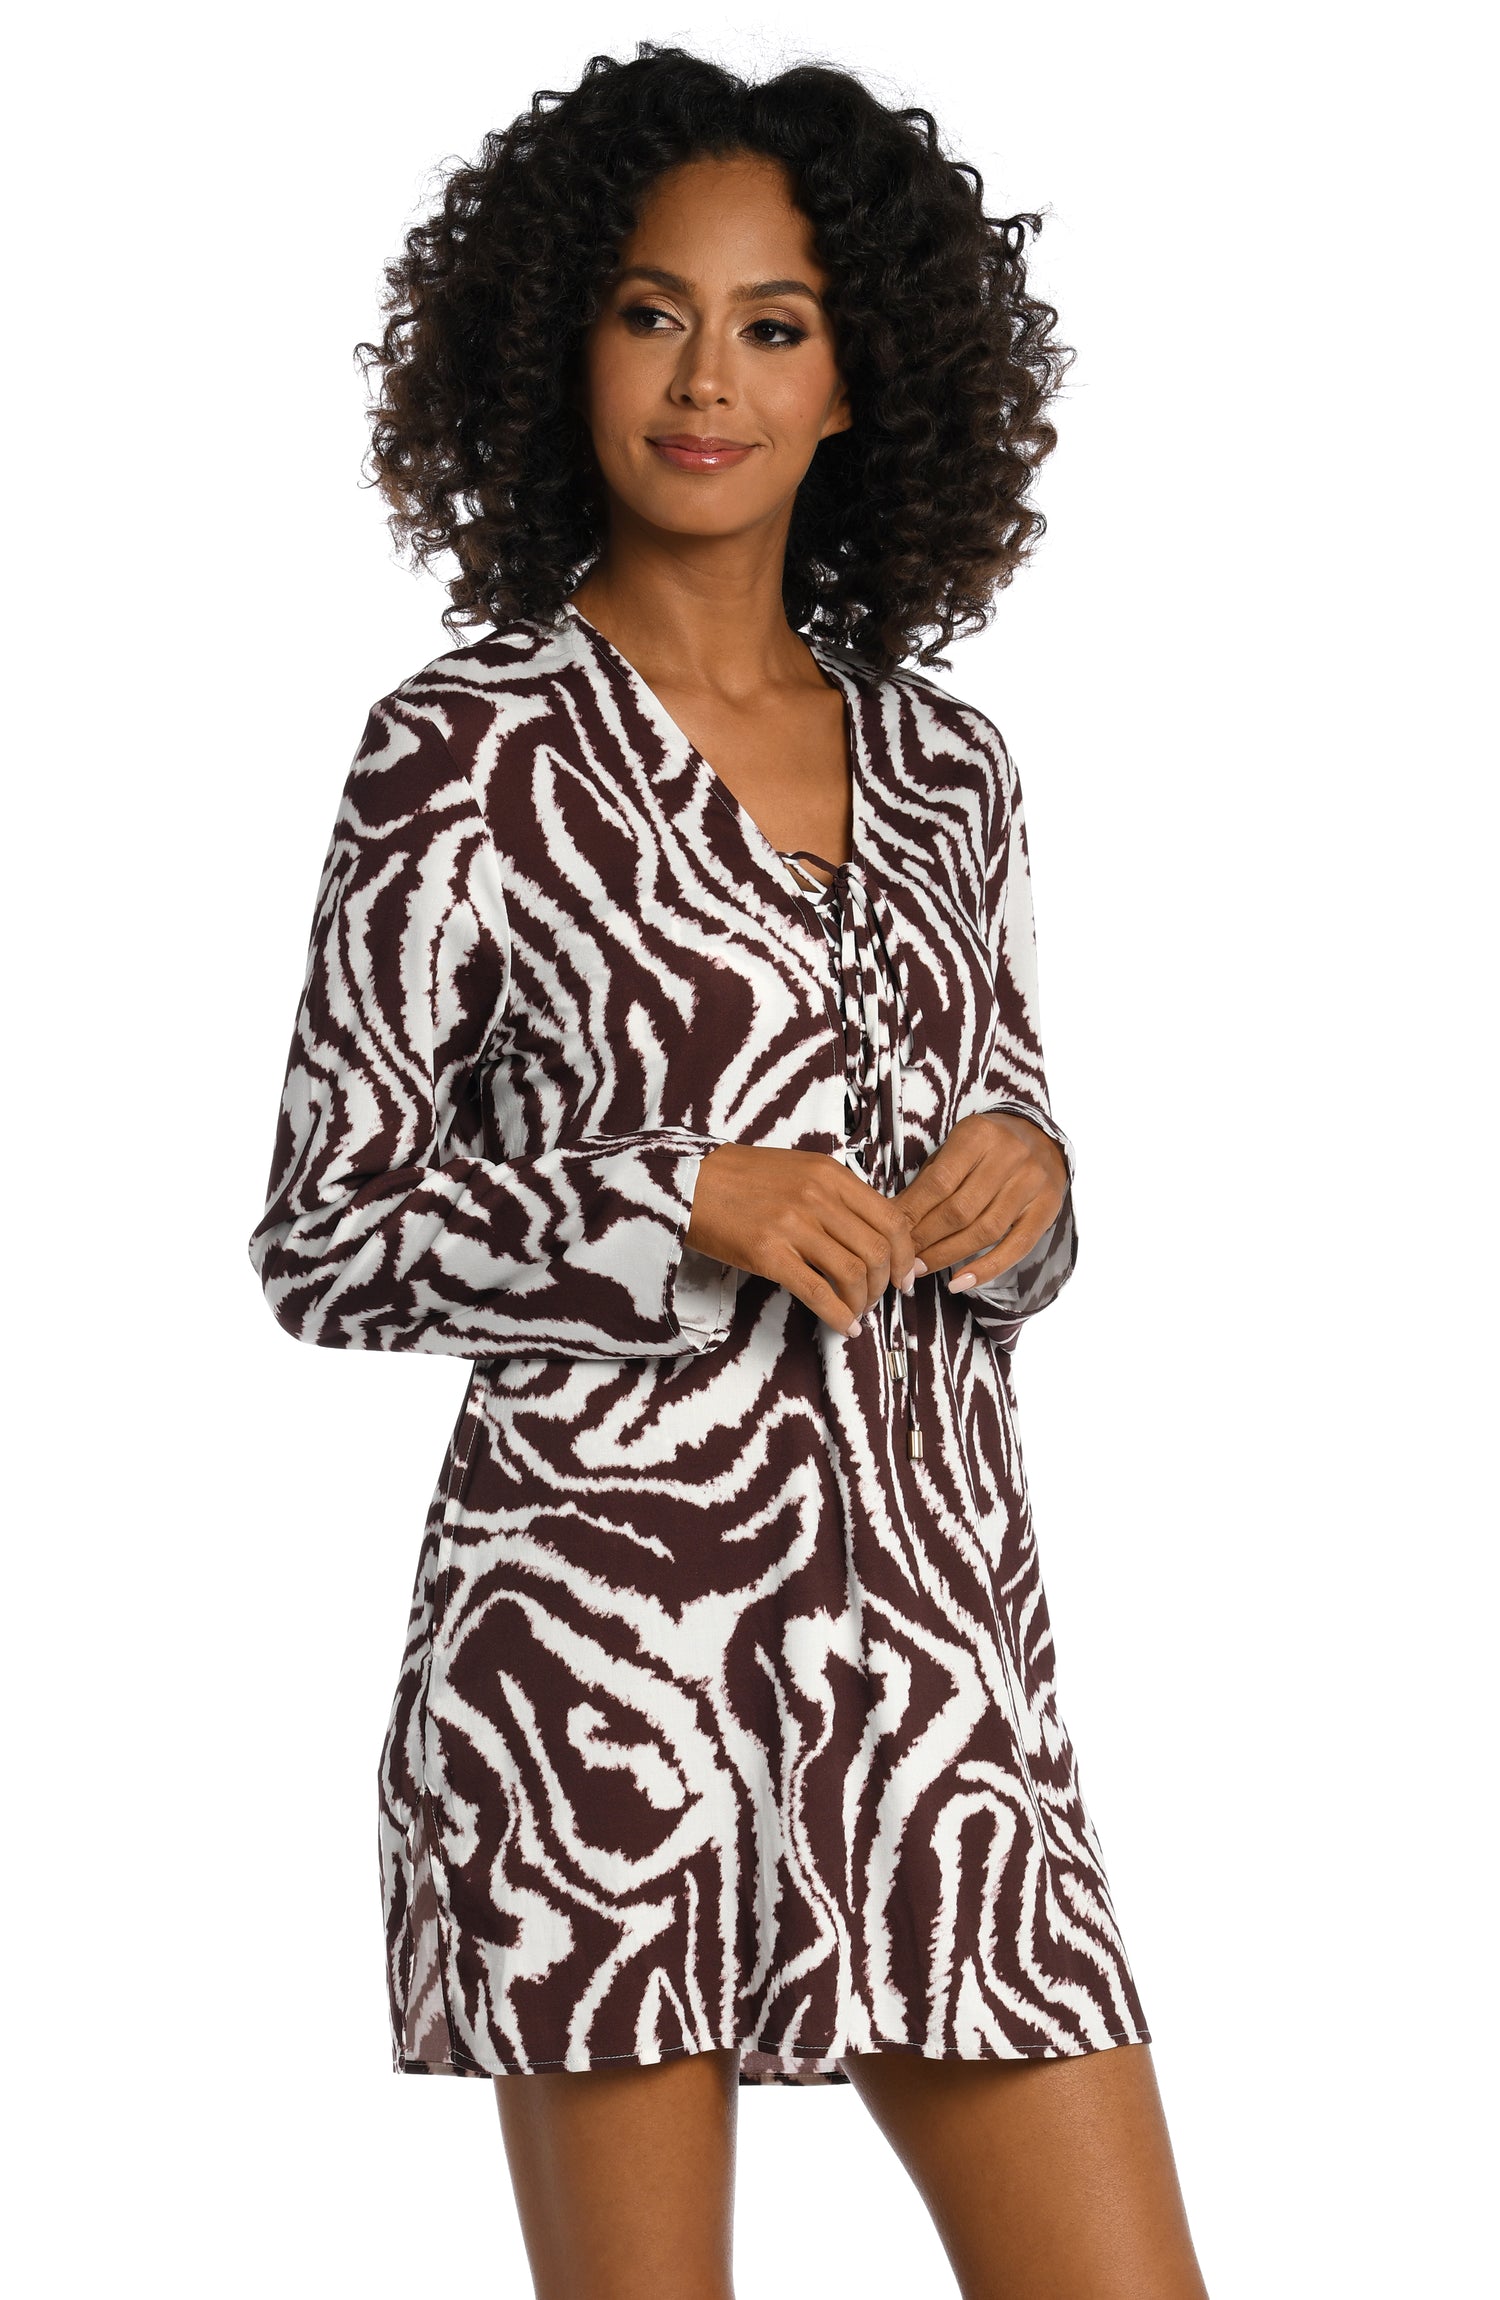 Model is wearing a java colored animal printed v-neck tunic cover up in our Fierce Lines collection!